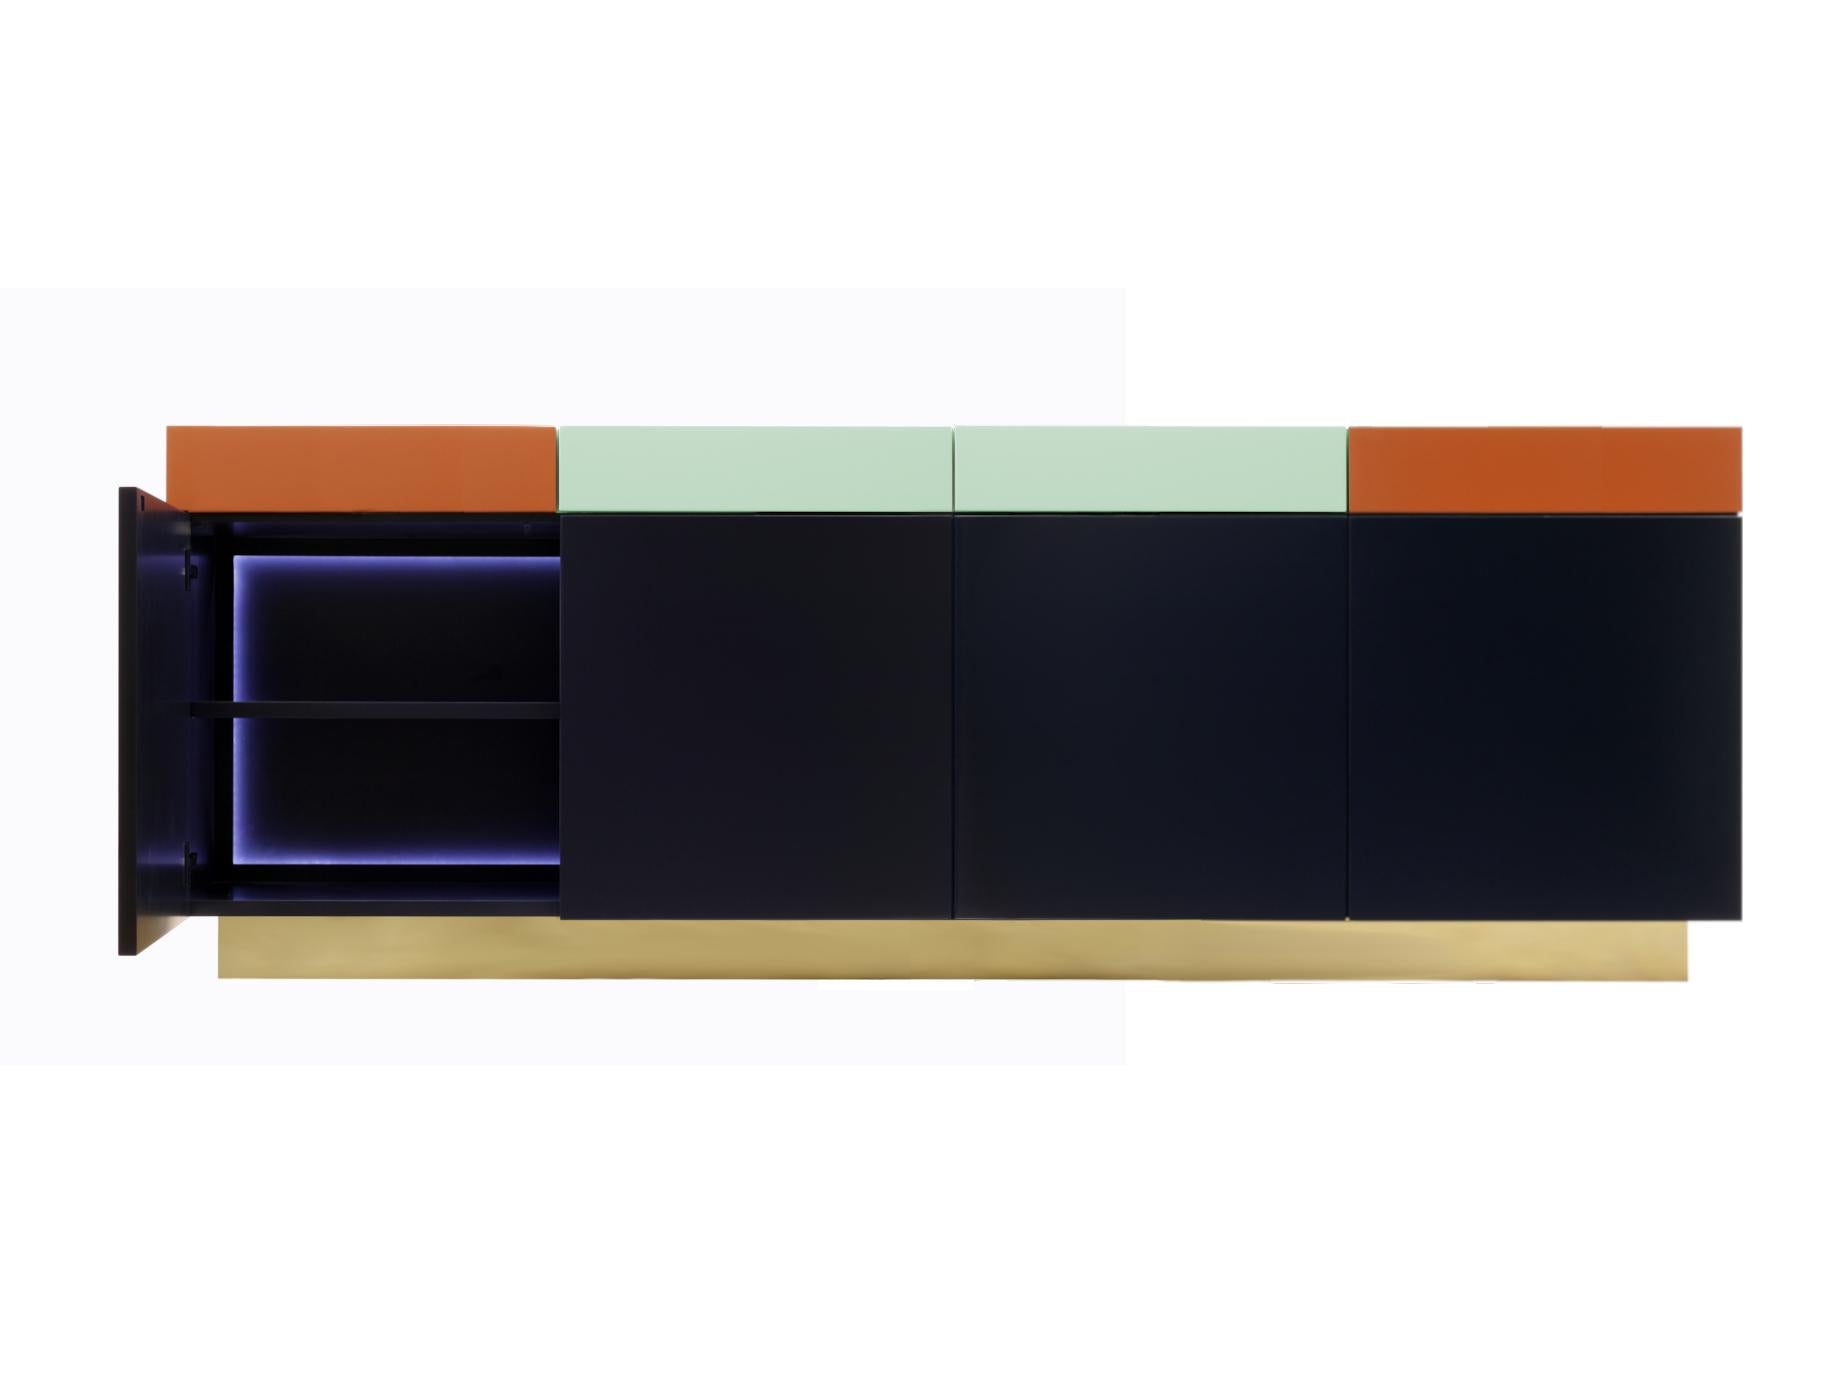 A functional and practical cabinet, based on a discrete elegance, Greta combines a playful geometrical shapes, colors and woodwork.
The outside is formed by 4 drawers on top and 4 doors beneath them, all of which with the lacquer color painting,